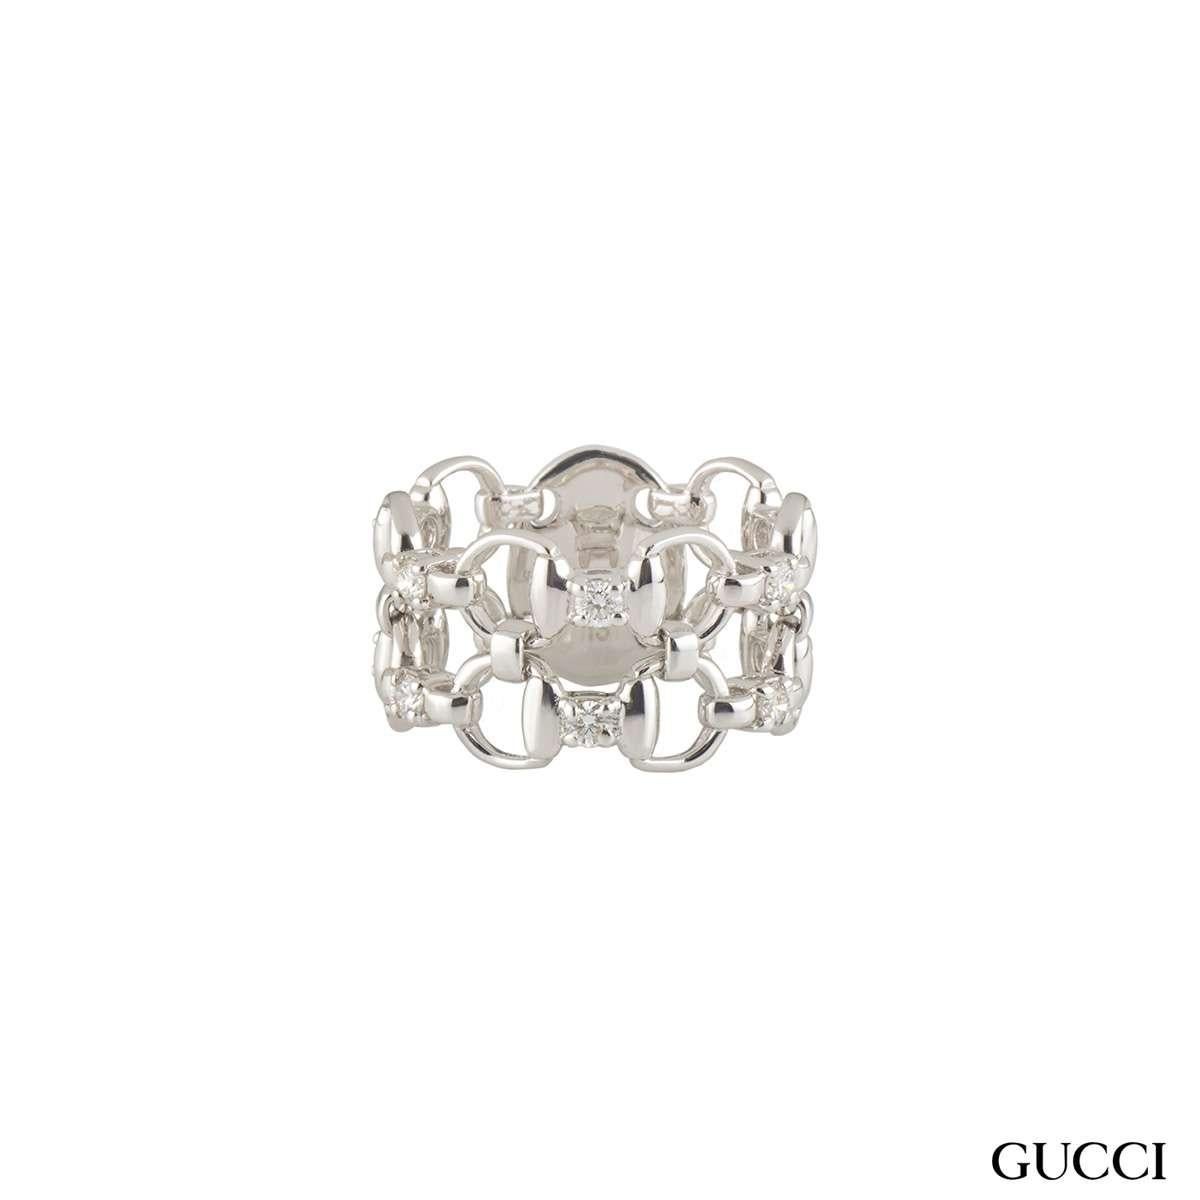 A simple 18k white gold plain Gucci diamond ring from the Horsebit collection. The ring comprises of the open work iconic horseshoe design all the way around with round brilliant cut diamonds even spread around. The diamonds have a total approximate